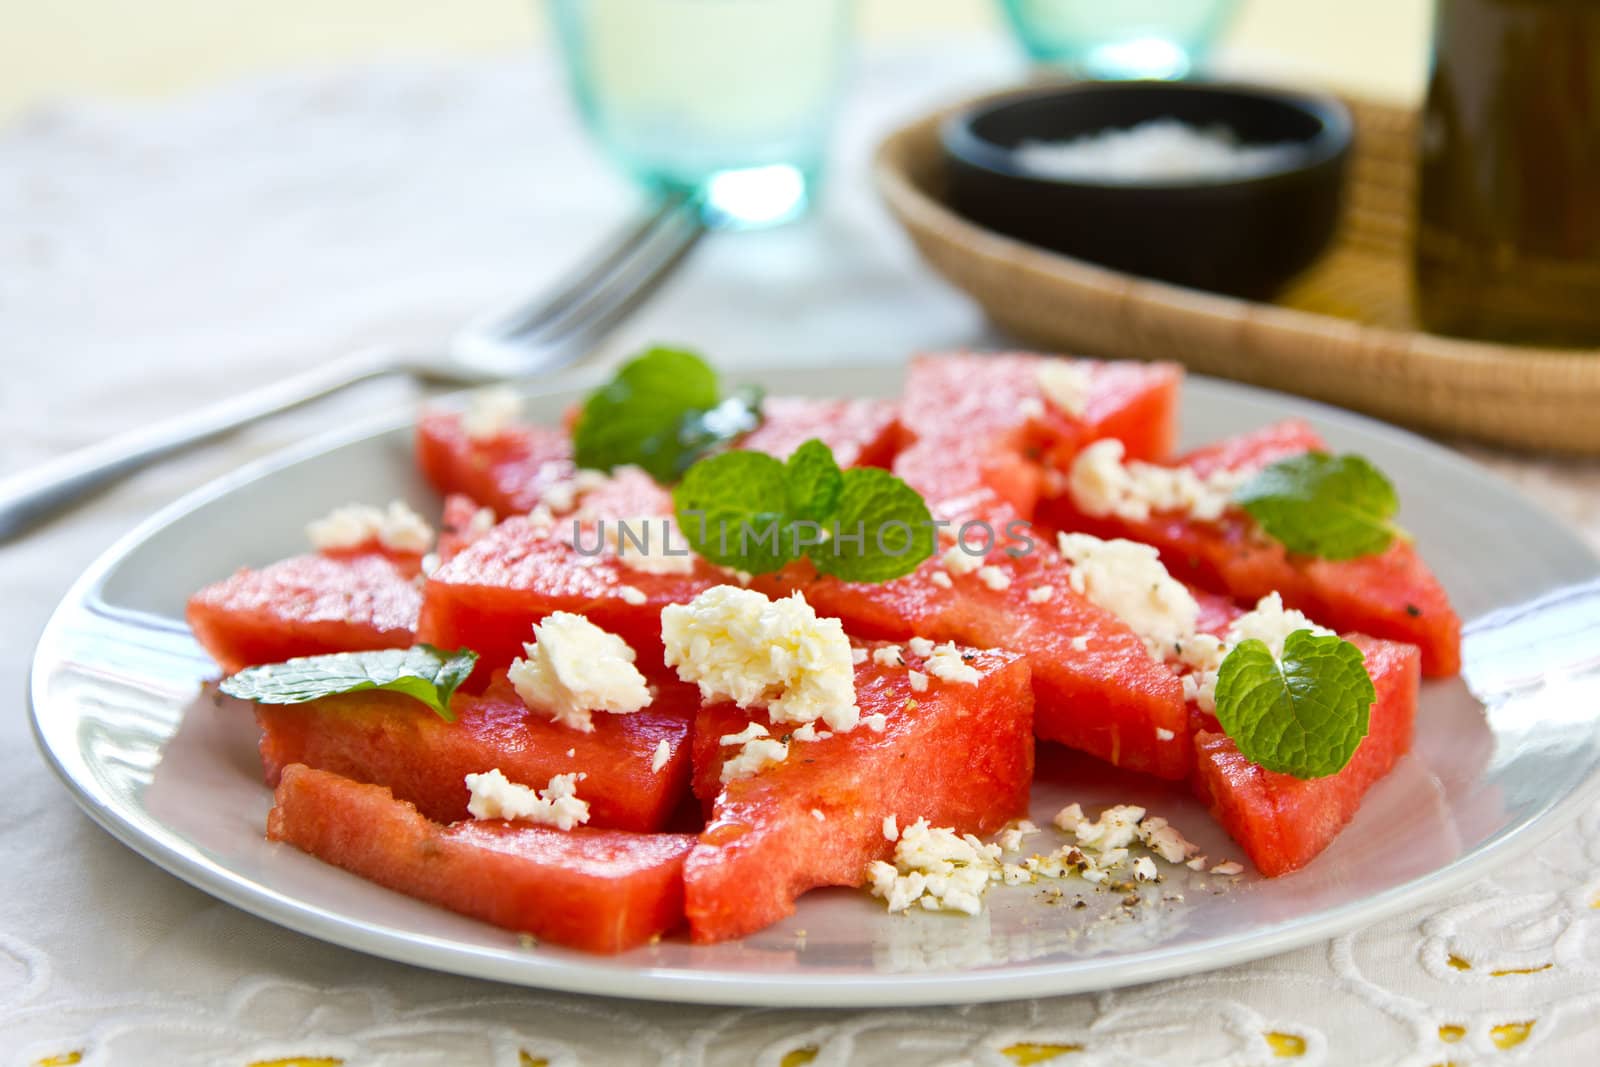 Watermelon with Feta cheese salad by vanillaechoes